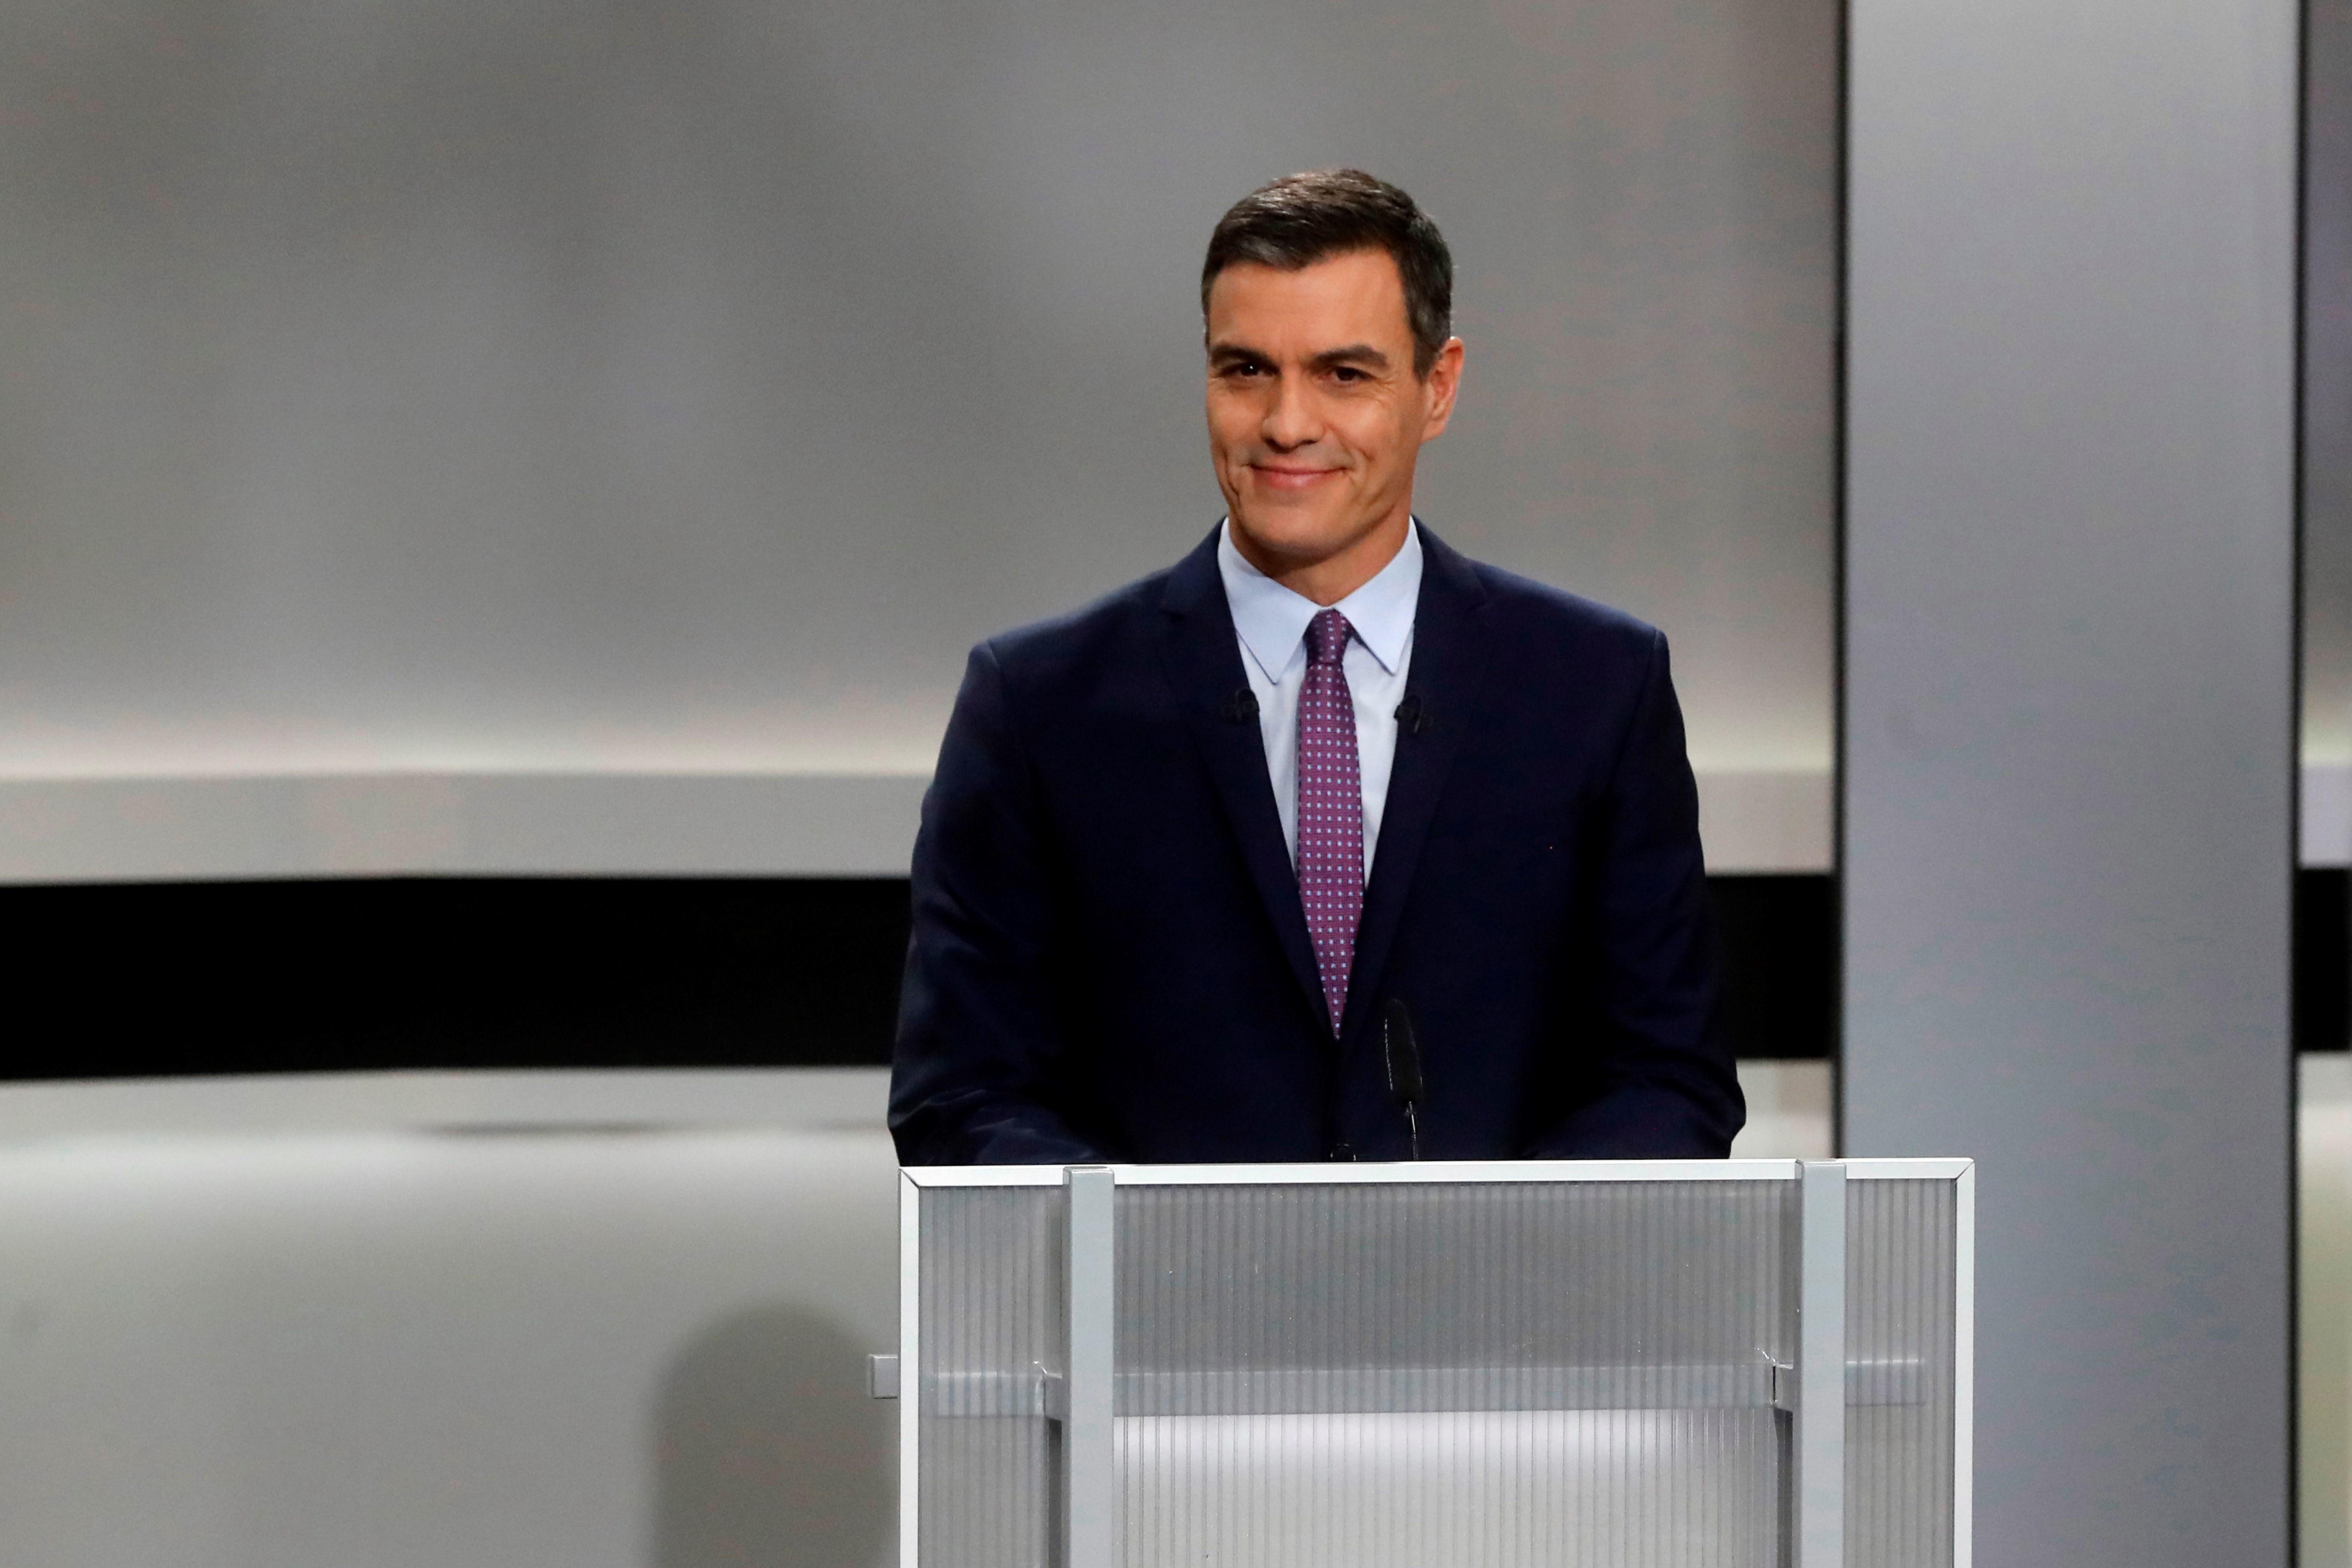 Sánchez admits his mistake and now says Spanish public prosecutors are independent